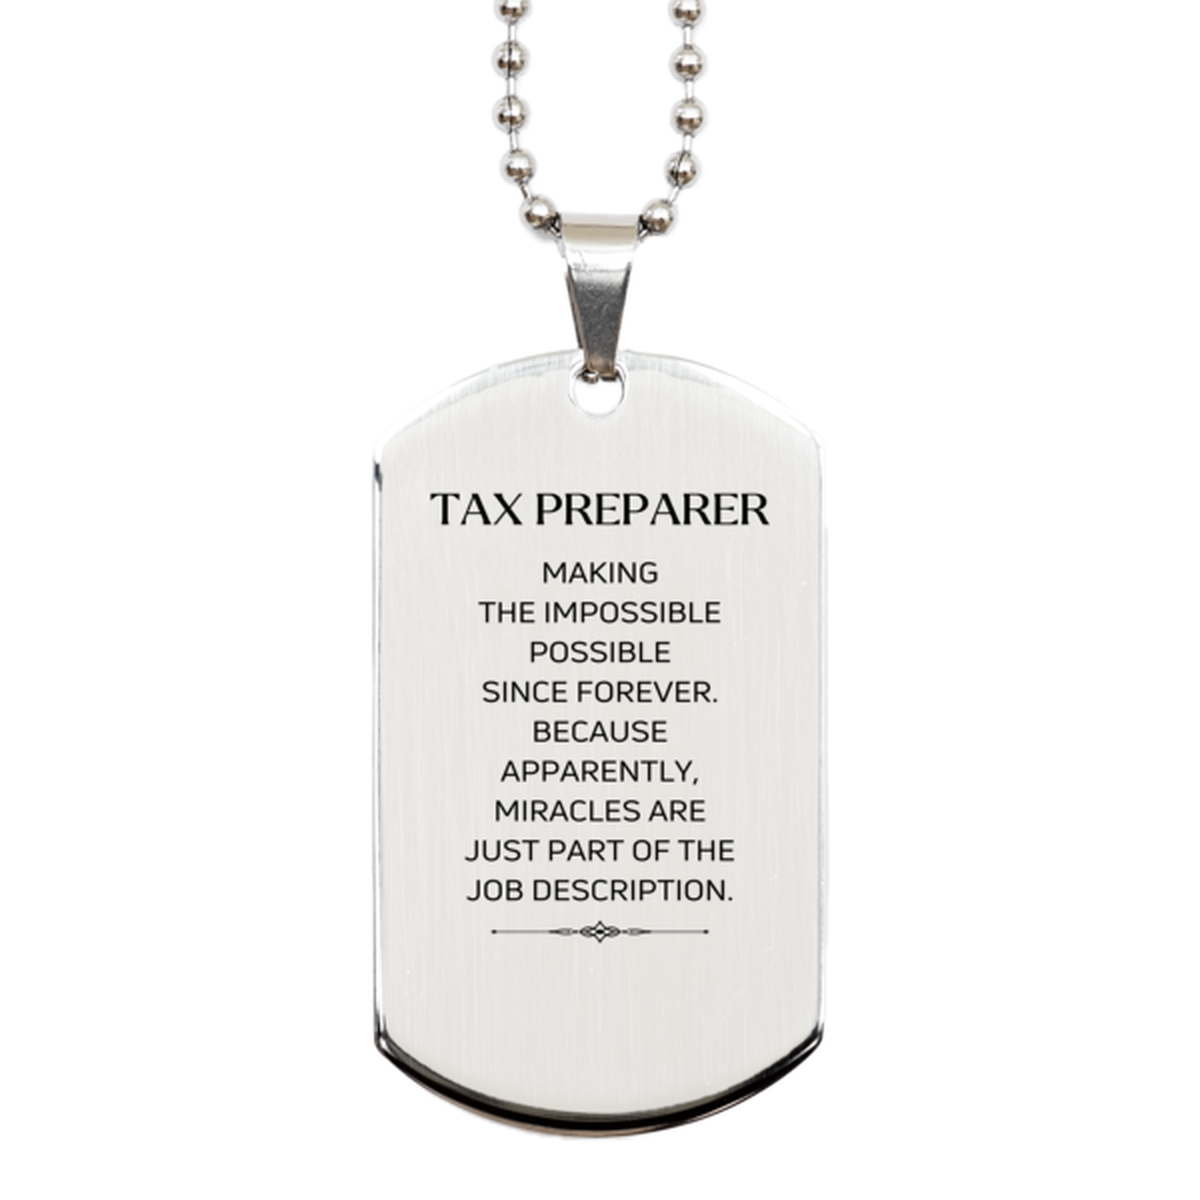 Funny Tax Preparer Gifts, Miracles are just part of the job description, Inspirational Birthday Silver Dog Tag For Tax Preparer, Men, Women, Coworkers, Friends, Boss